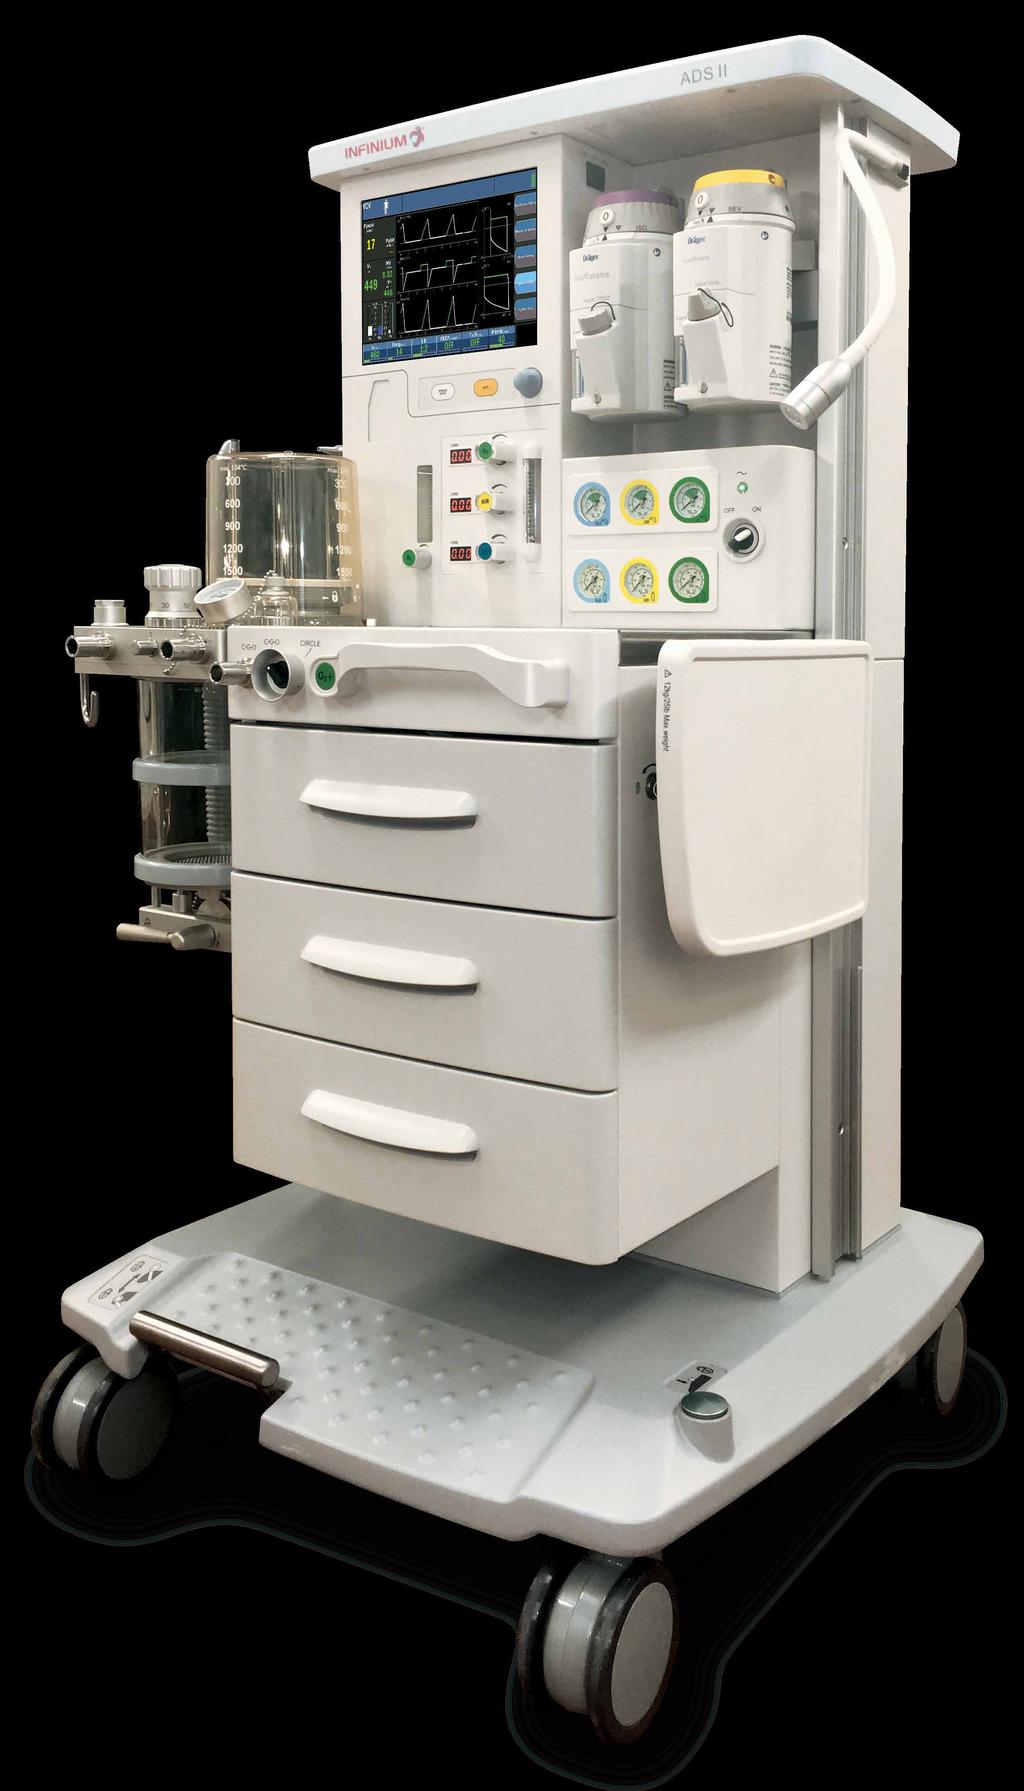 ADS II TM ADS II Anesthesia Delivery System The ADSII is an advanced yet easy to use anesthesia workstation that provides accurate, pneumatically driven and electronically controlled ventilation.